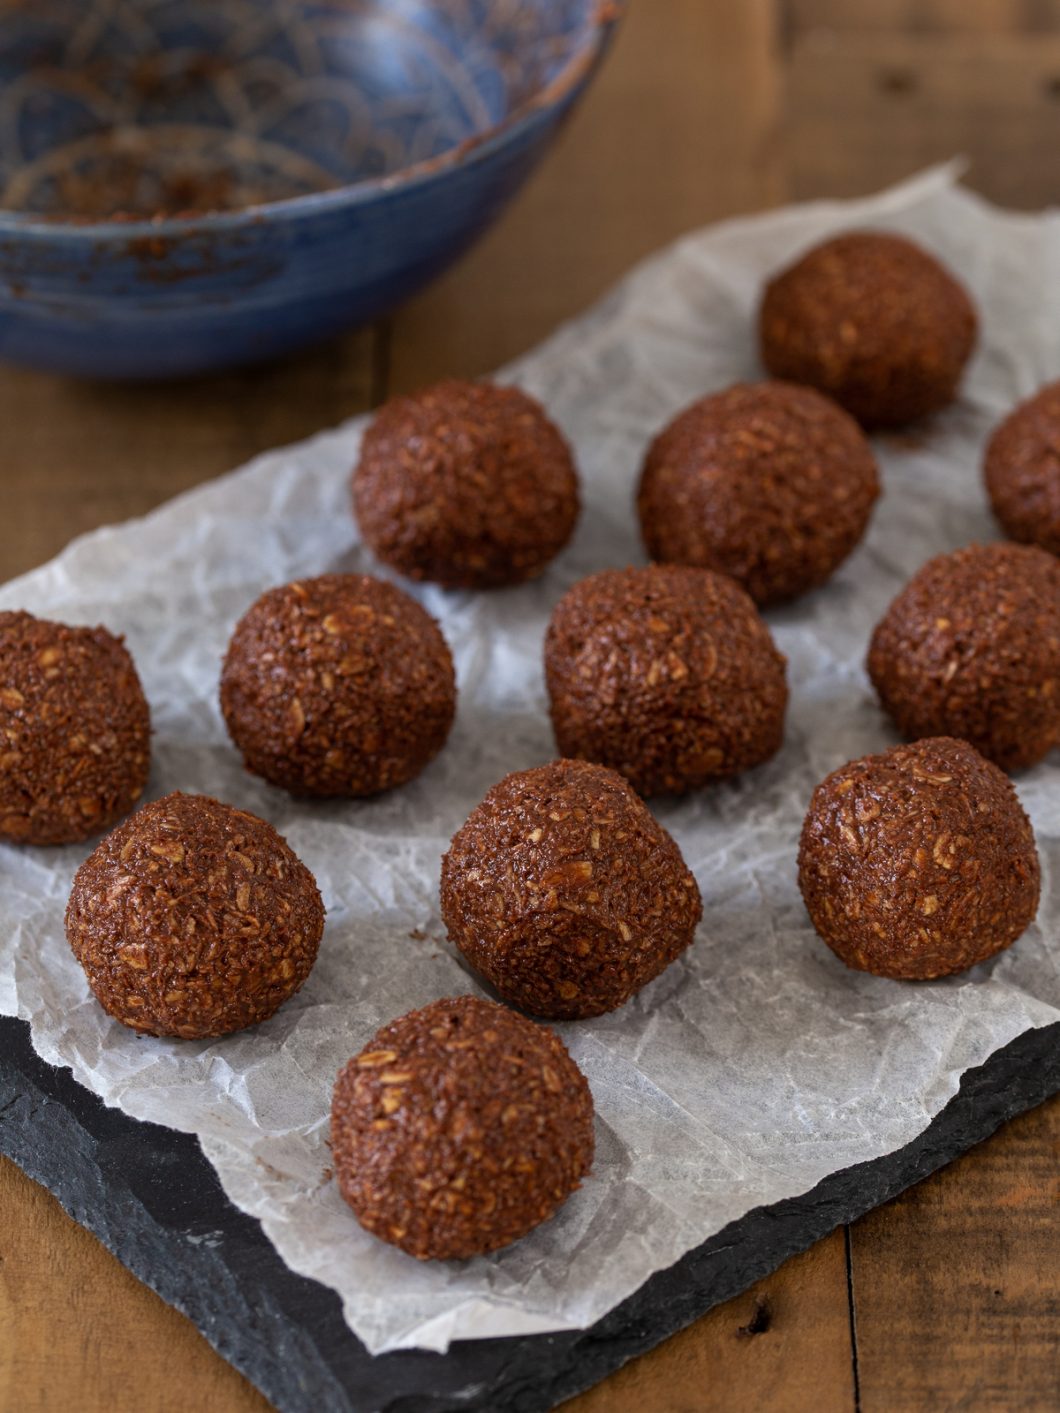 Chocolate oat balls with no coating.